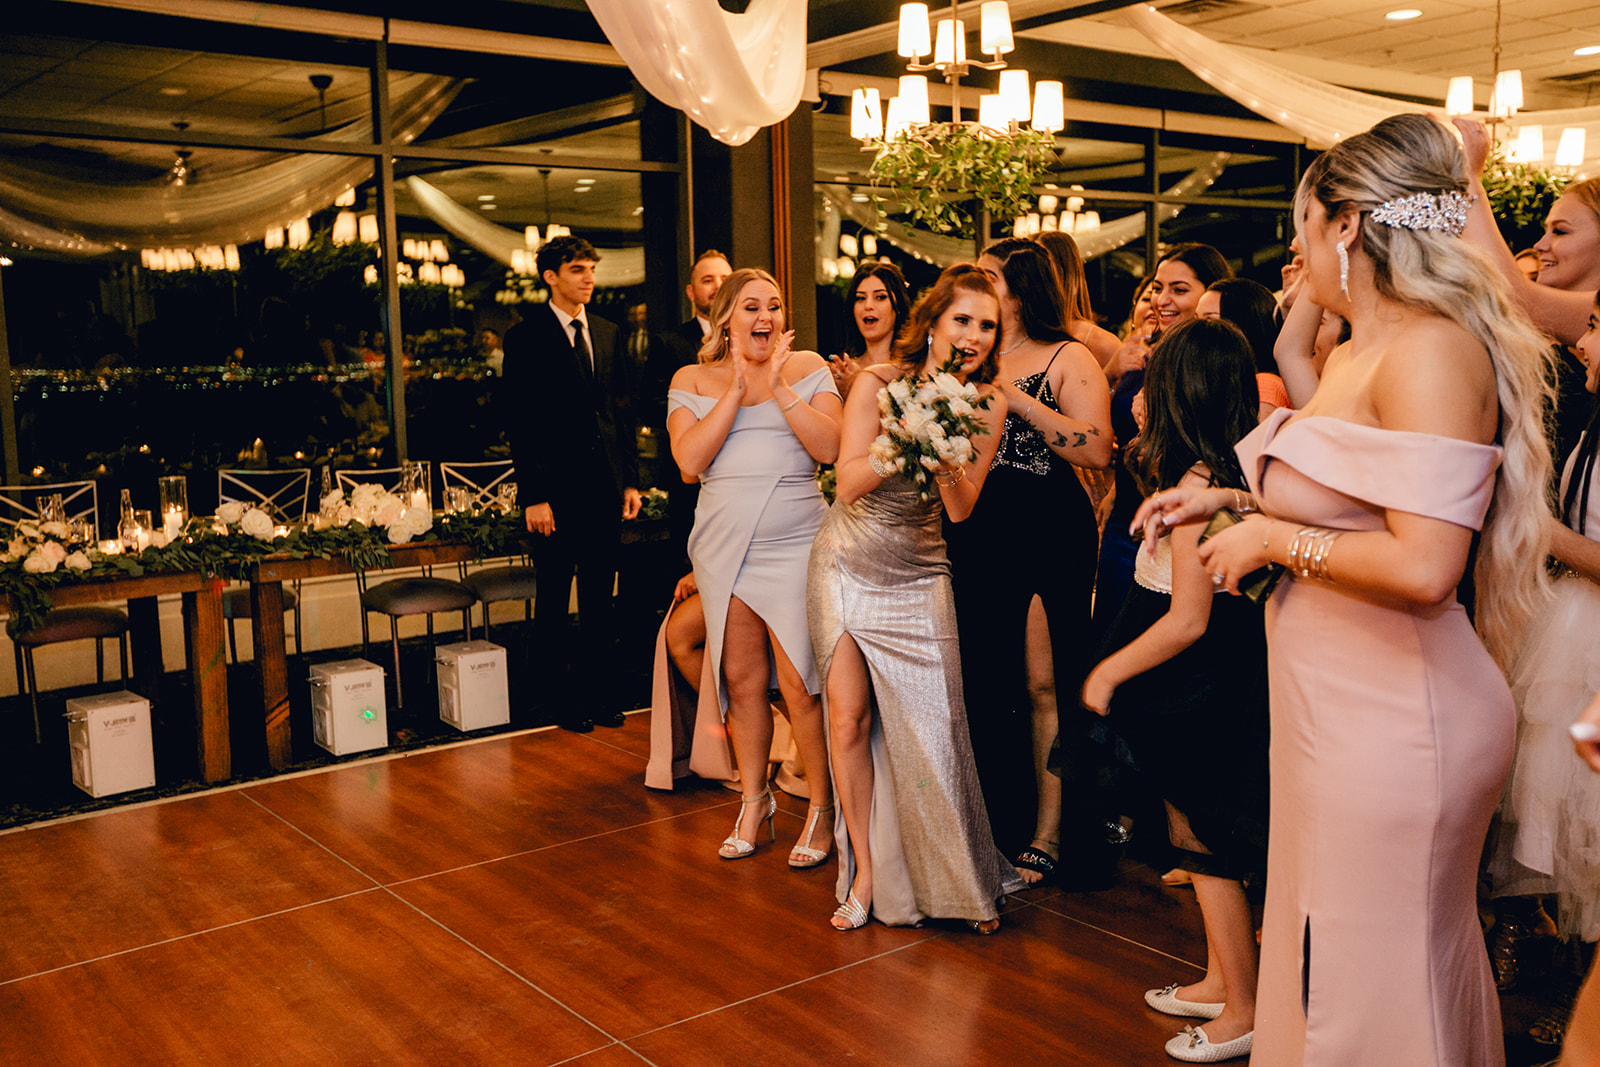 Guests Catching Bouquet during Wedding Reception 